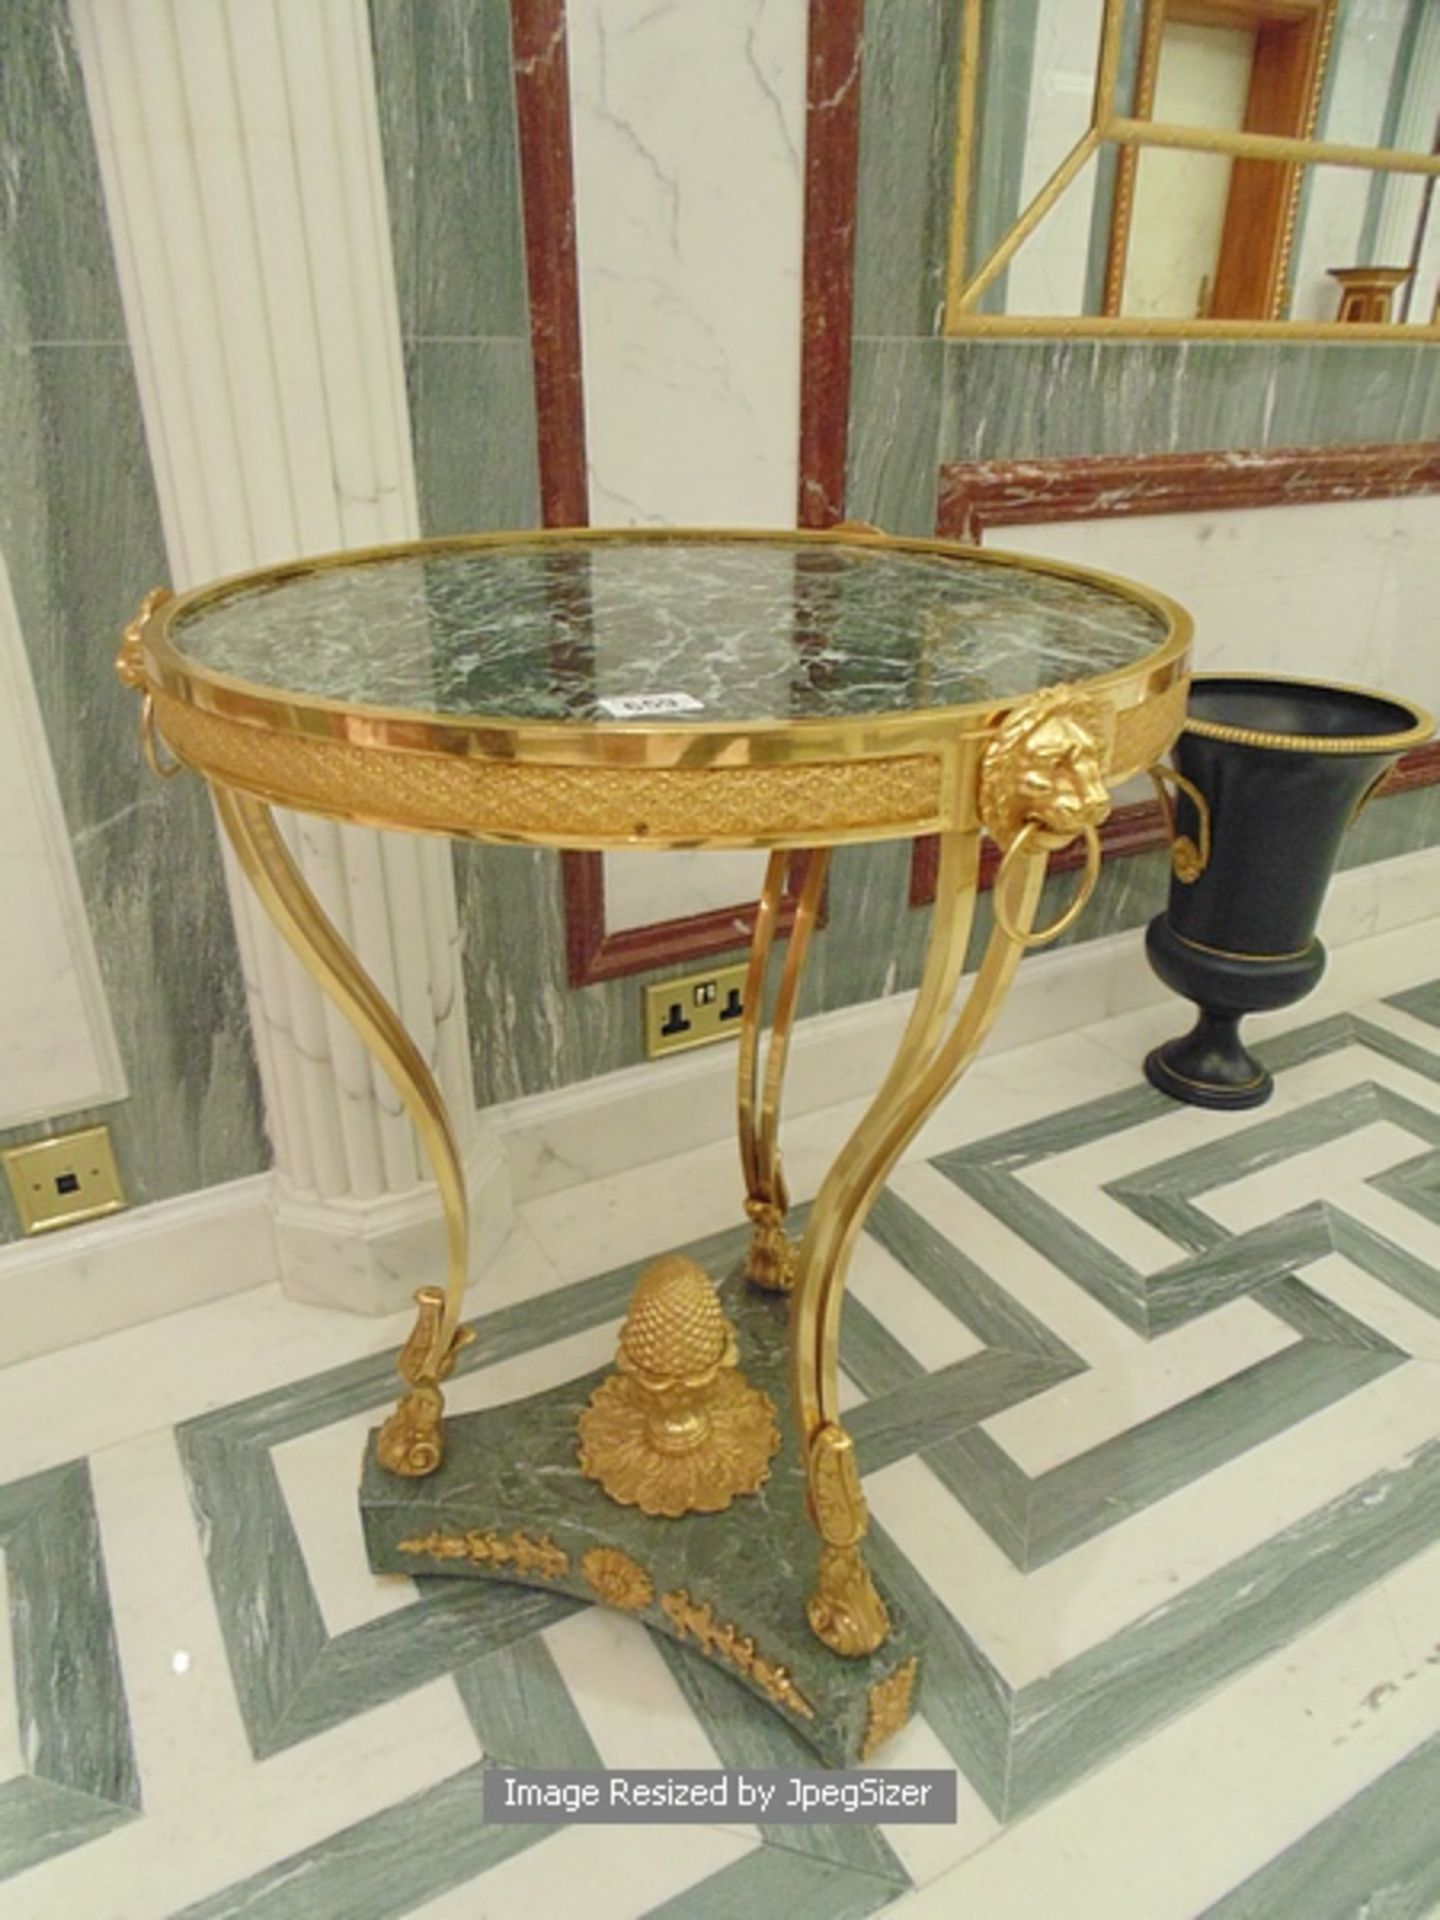 Empire style gilt bronze and marble centre table, the Verde marble top with flat edge sits on a